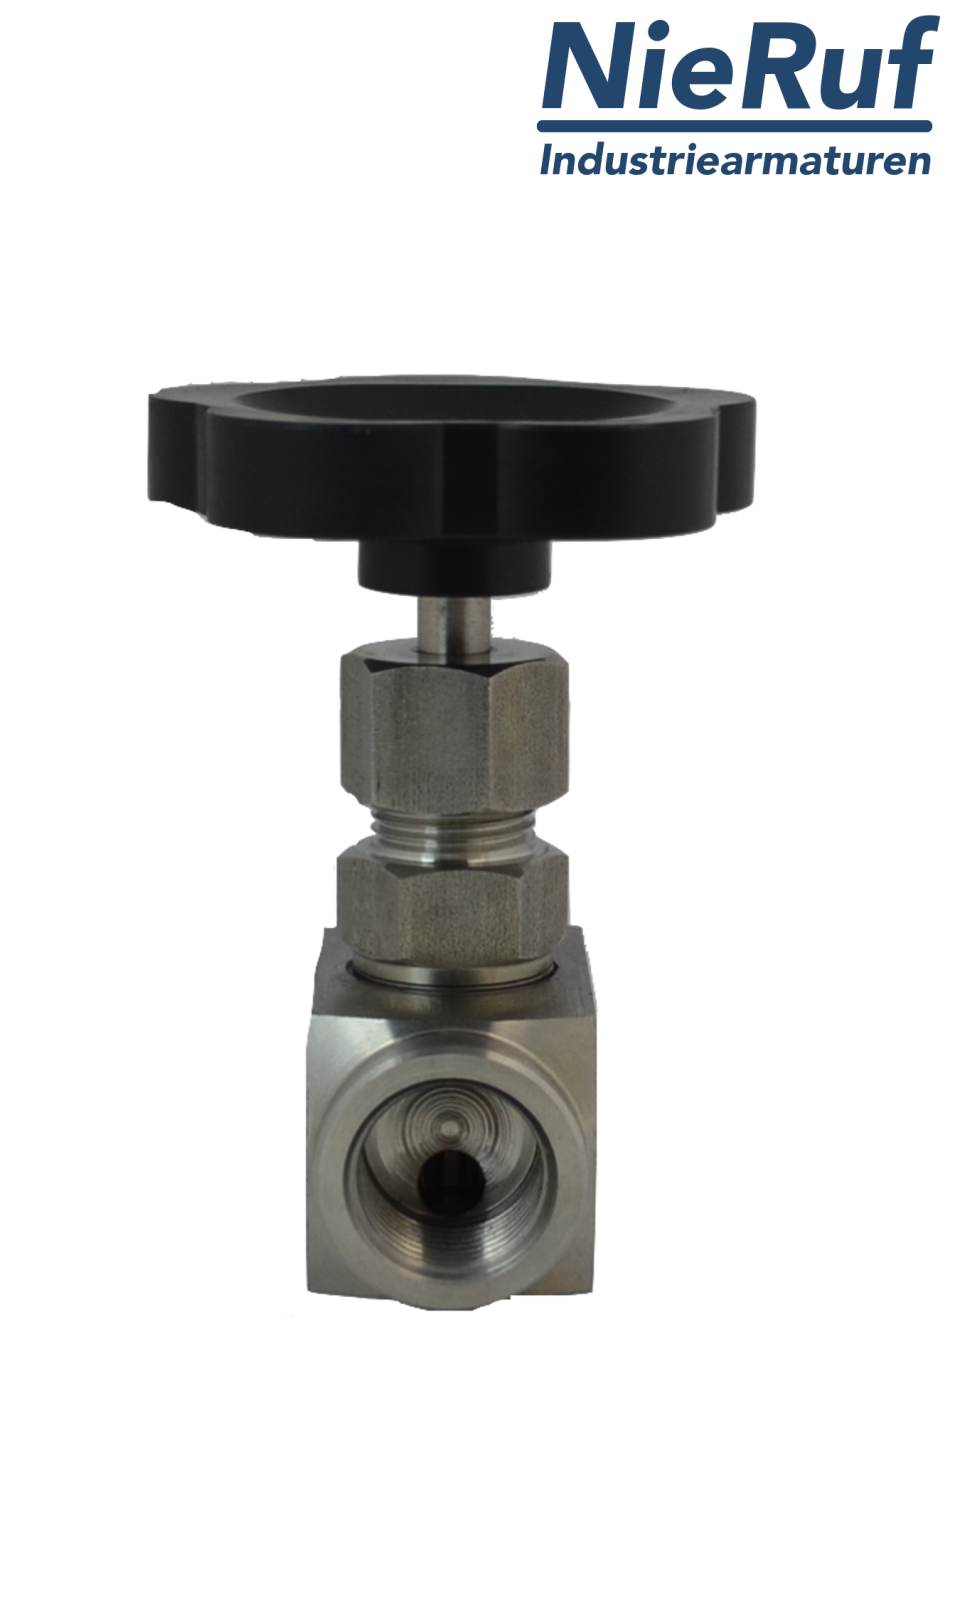 high pressure needle valve  2" inch NV01 stainless steel 1.4571